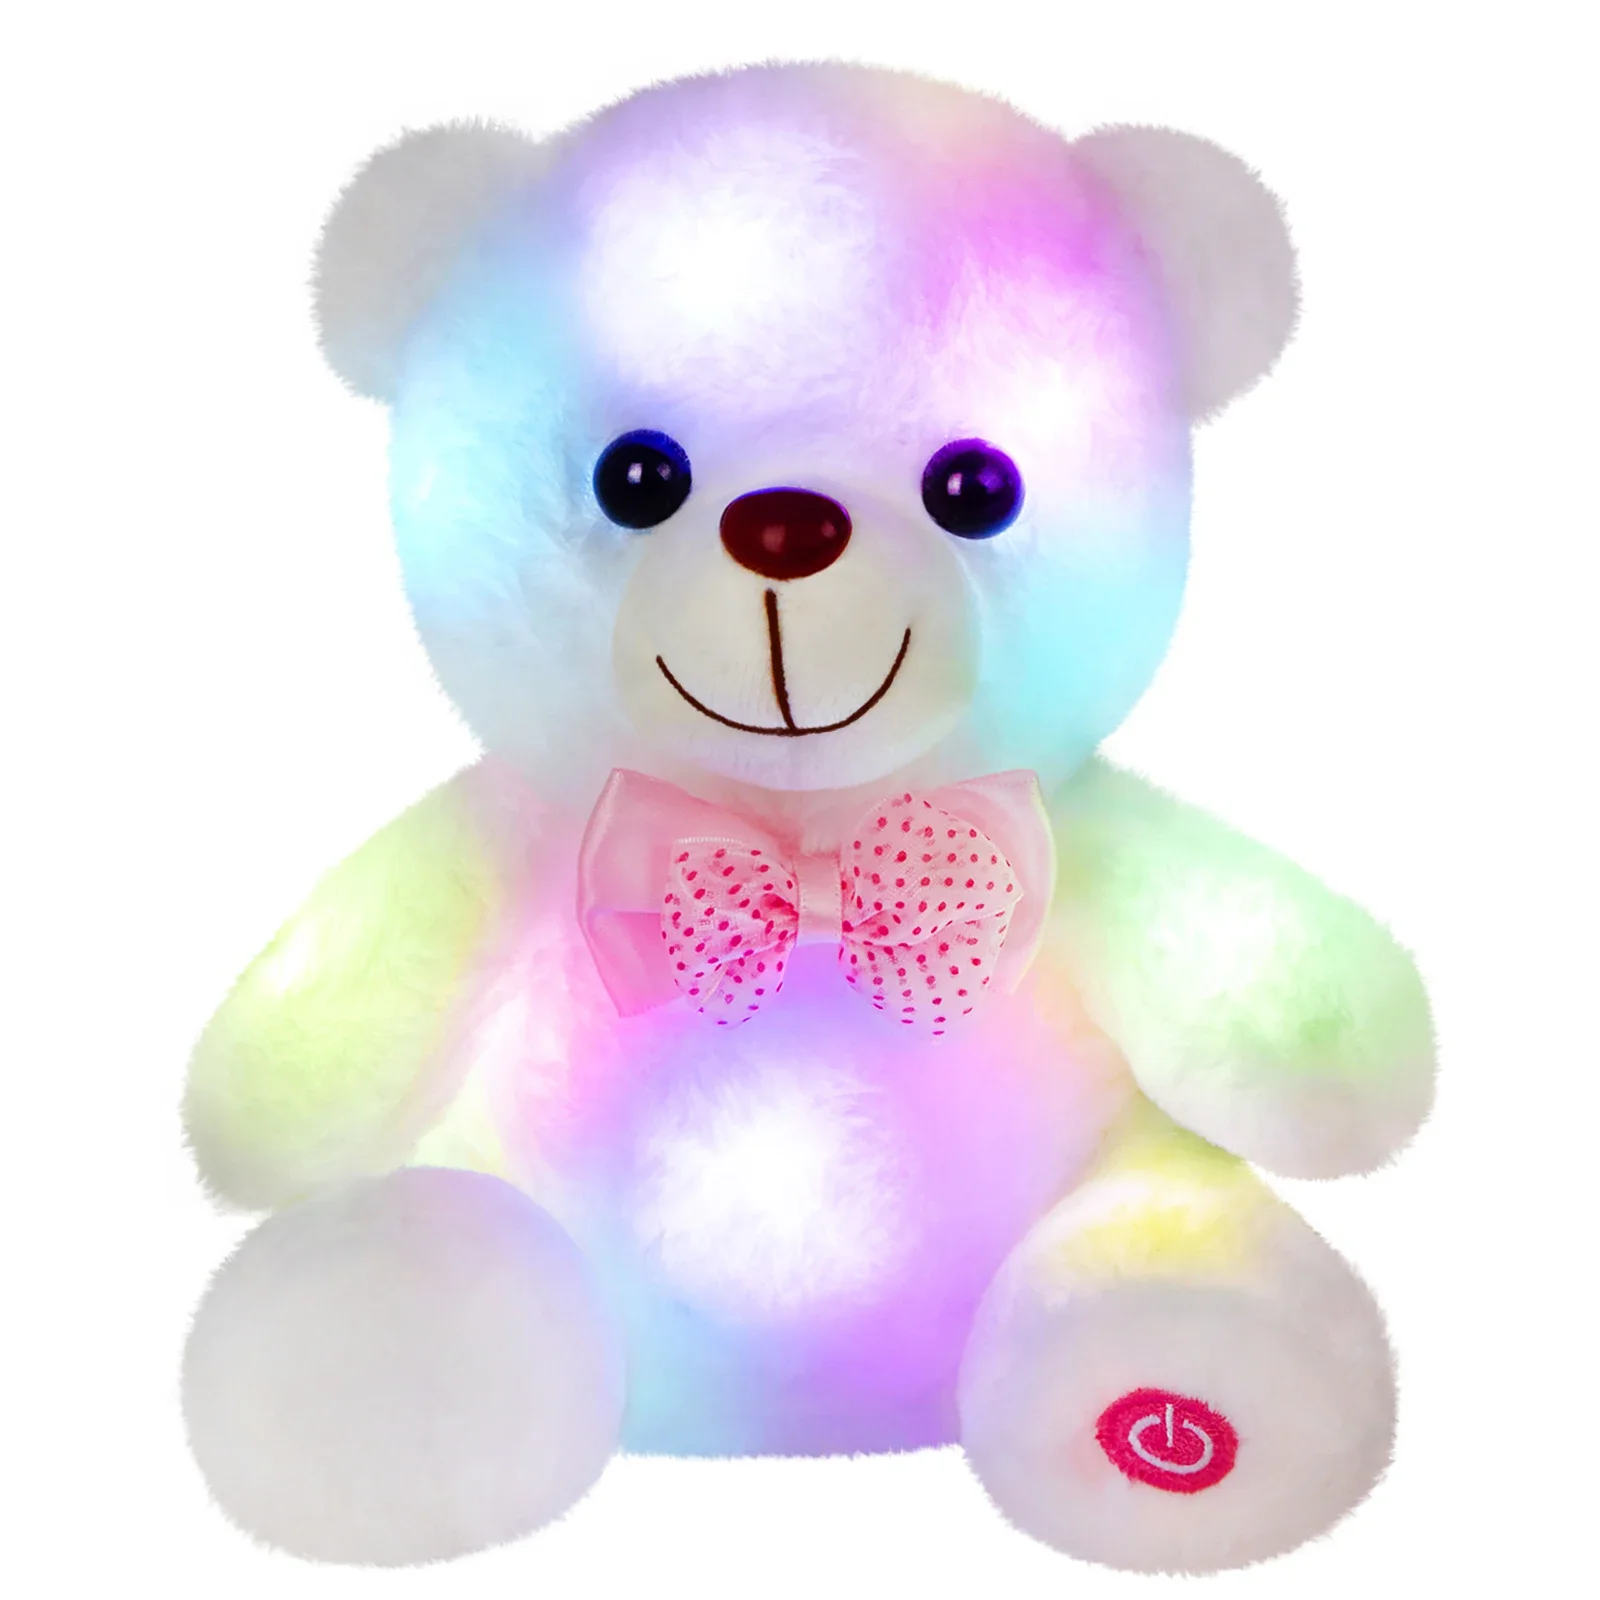 White Bear LED Light Plush Animals Easy to Clean High Quality 20cm Kawaii Doll Stuffed Toys for Girls Bed Sleeping Throw Pillows stay clean humidifier ultrasonic mist one gallon easy to fill tank led light and filter free